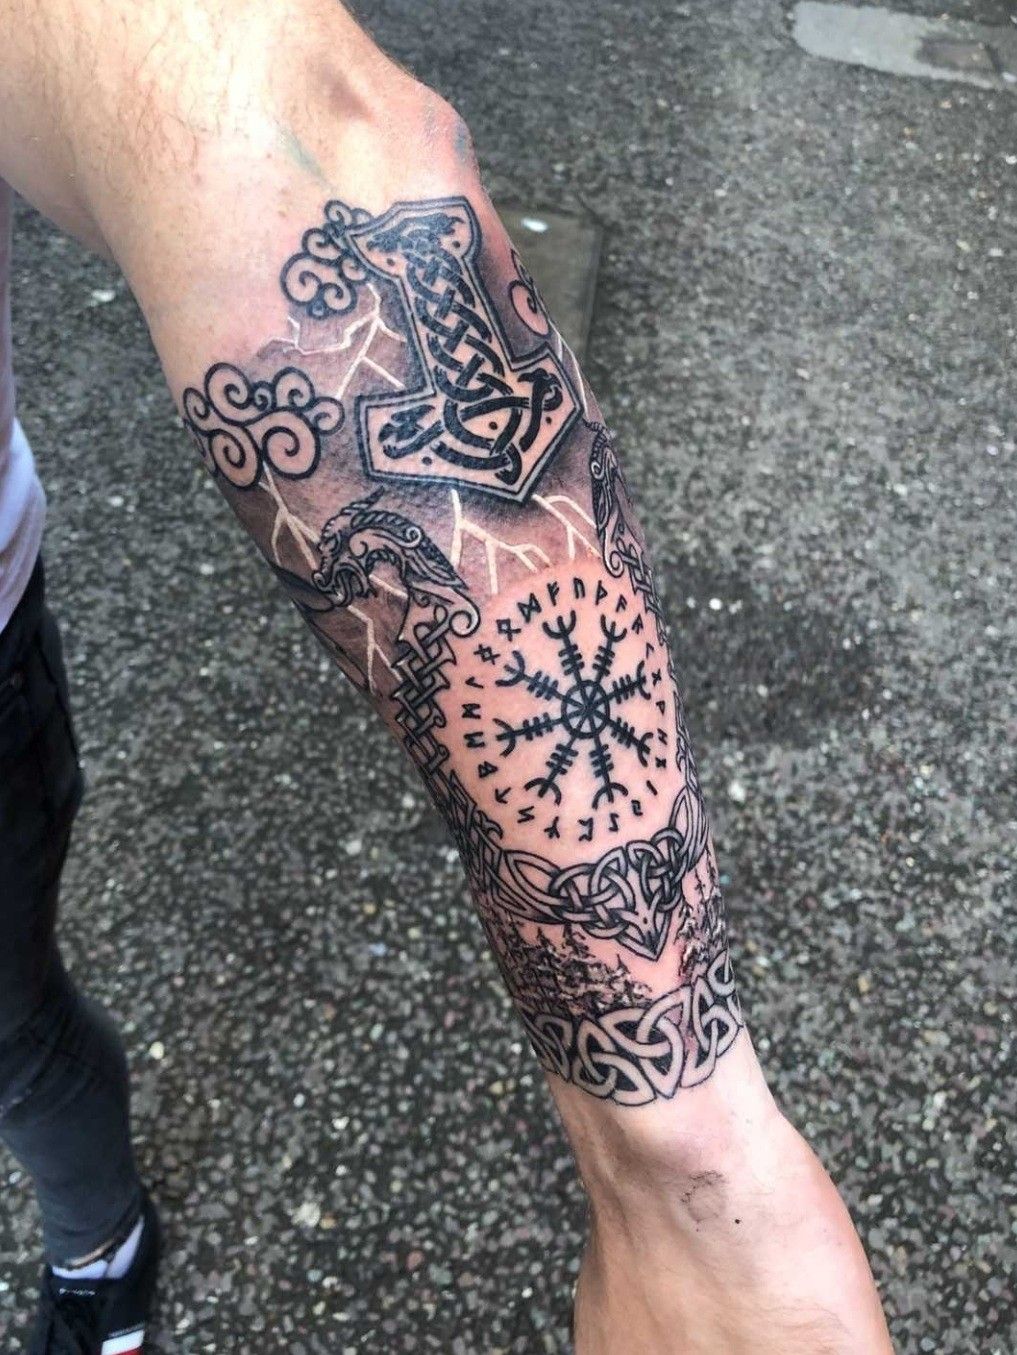 Brisbane Tattoo  Miles Norse inspired inner forearm piece bit of a cover  up near the edges otherwise good session all round hope you had a great  heal man cya next yr 